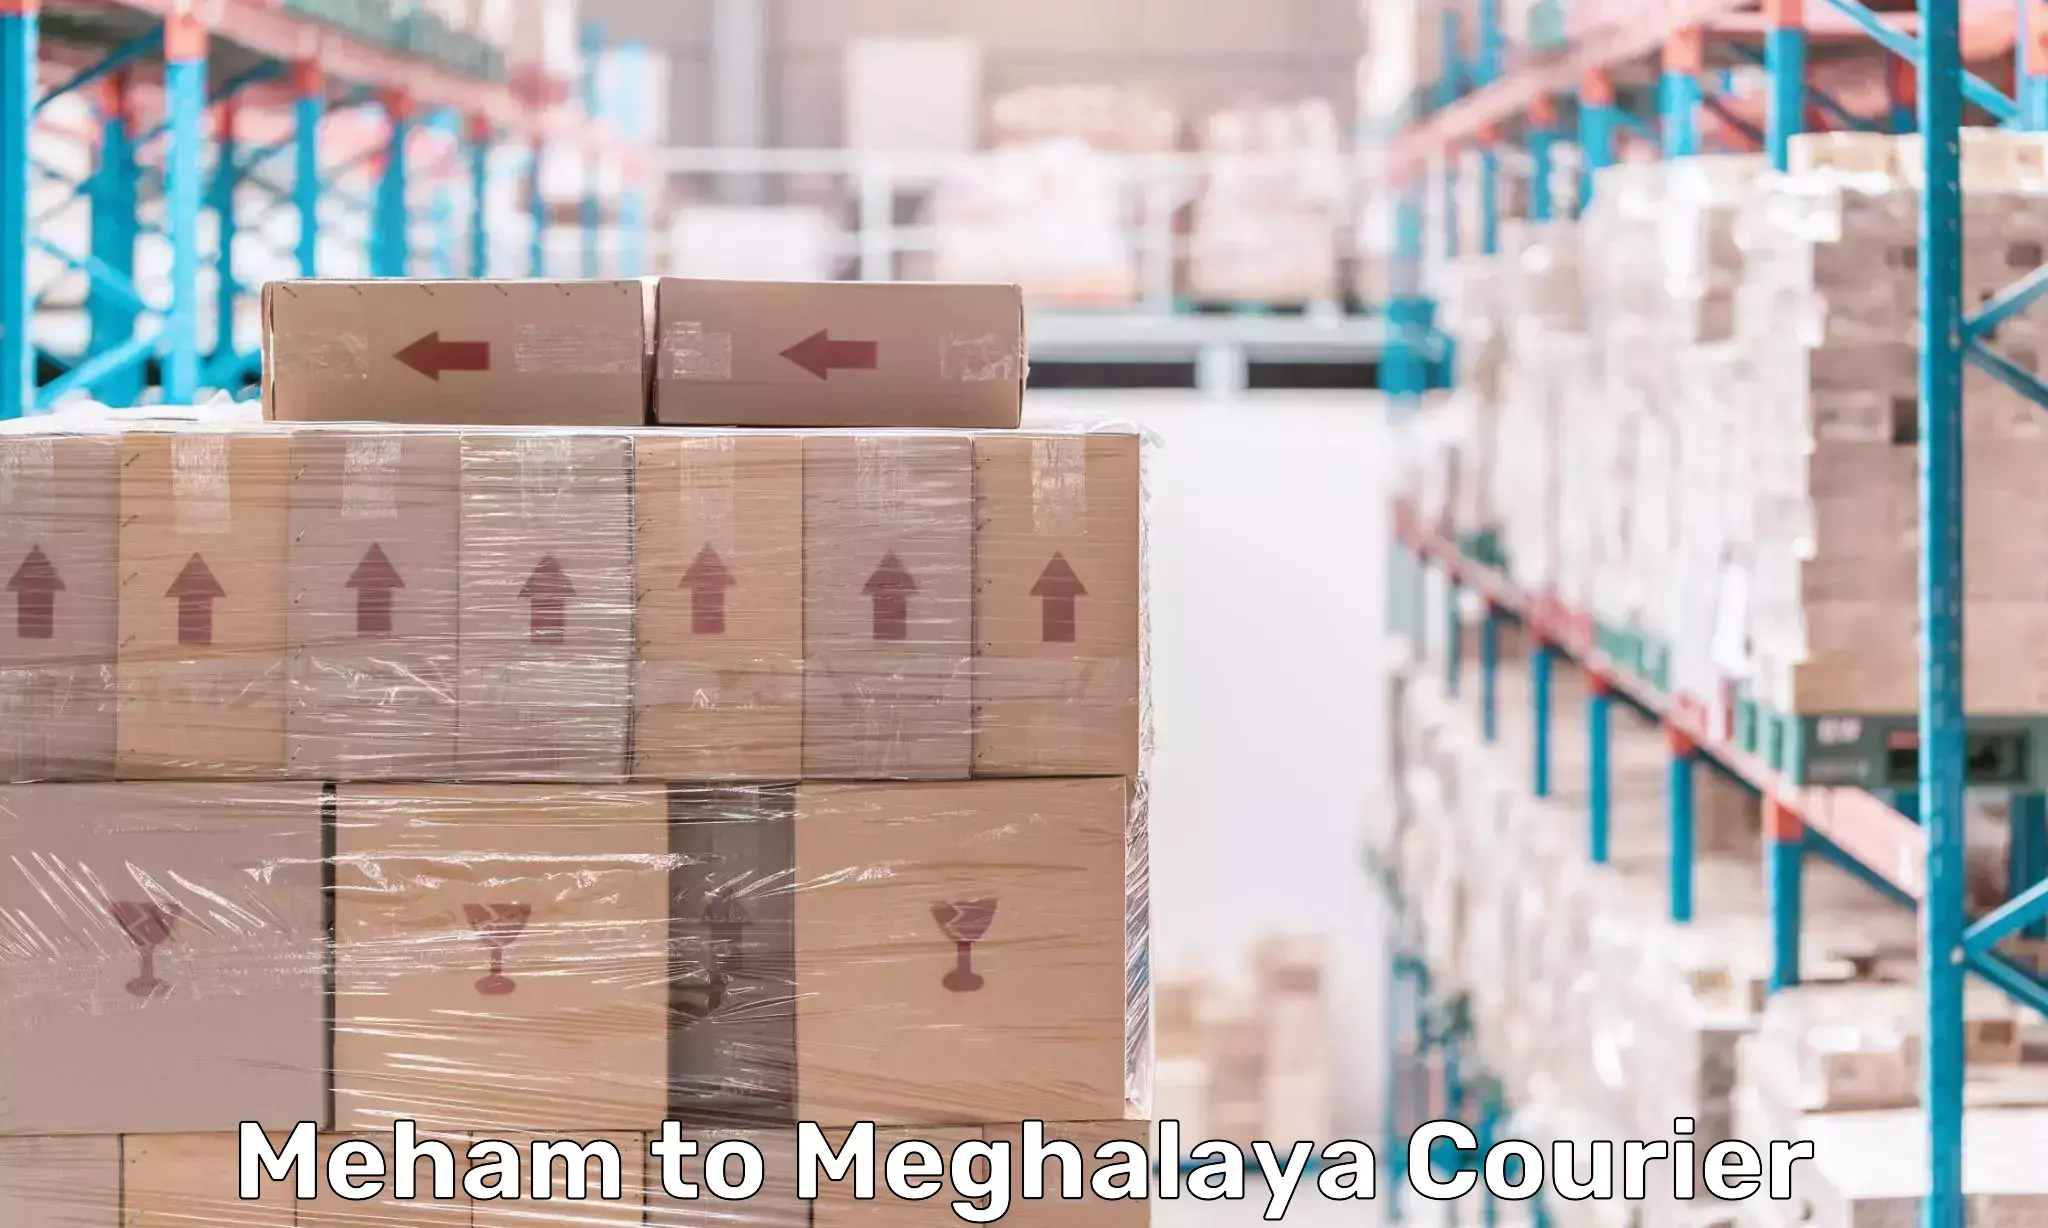 Multi-national courier services Meham to Umsaw